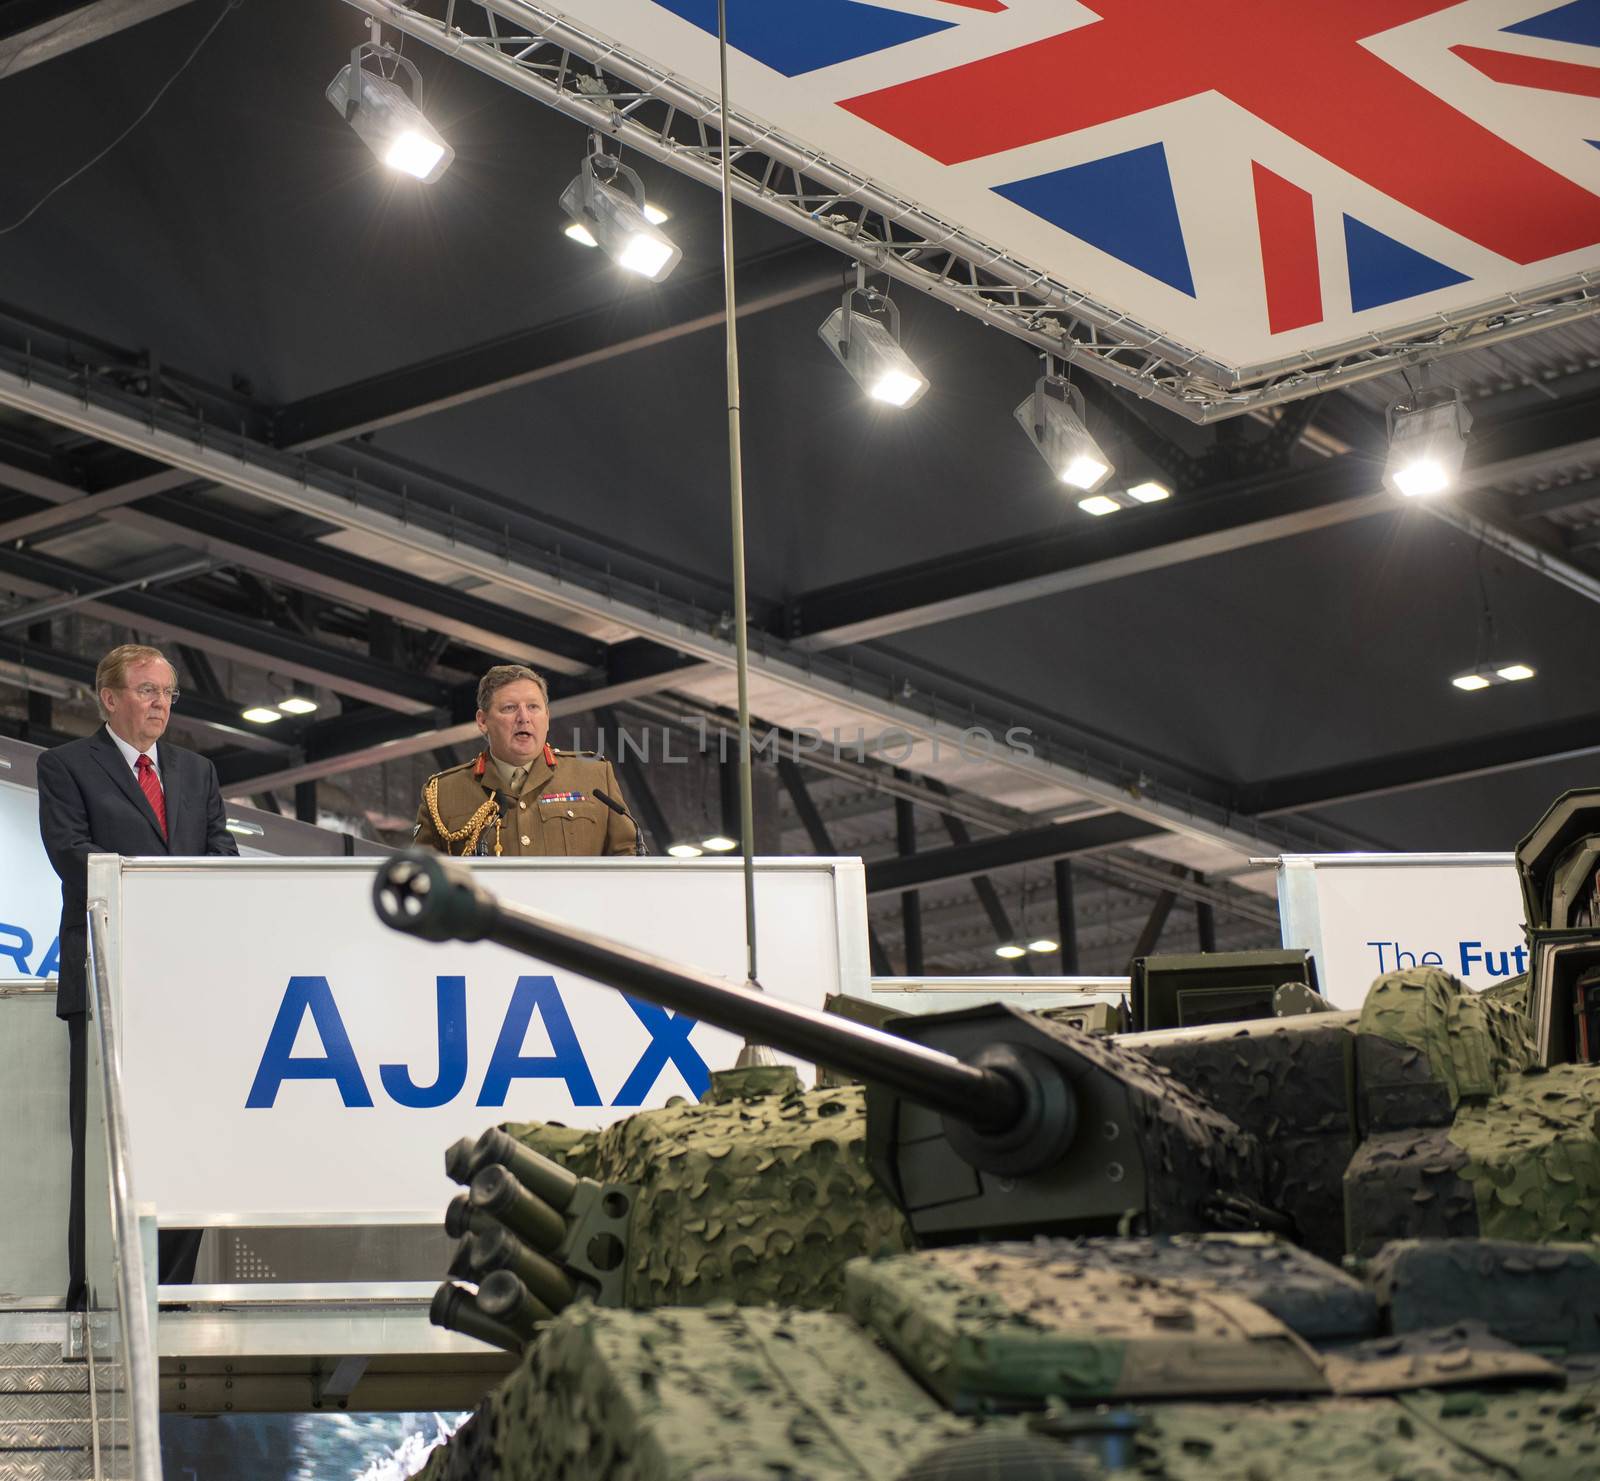 UNITED KINGDOM, London: Tank/APC	The Defence and Security International Exhibition (DSEI) began in London on September 15, 2015 despite a week of direct action protests by peace campaigners.  	The arms fair has seen over 30,000 people descend on London to see the 1,500 exhibitors who are displaying weapons of war from pistols and rifles up to tanks, assault helicopters and warships.  	Protesters attempted to block the main road into the exhibition, claiming that such an event strengthened the UK's ties to human rights abuses. 